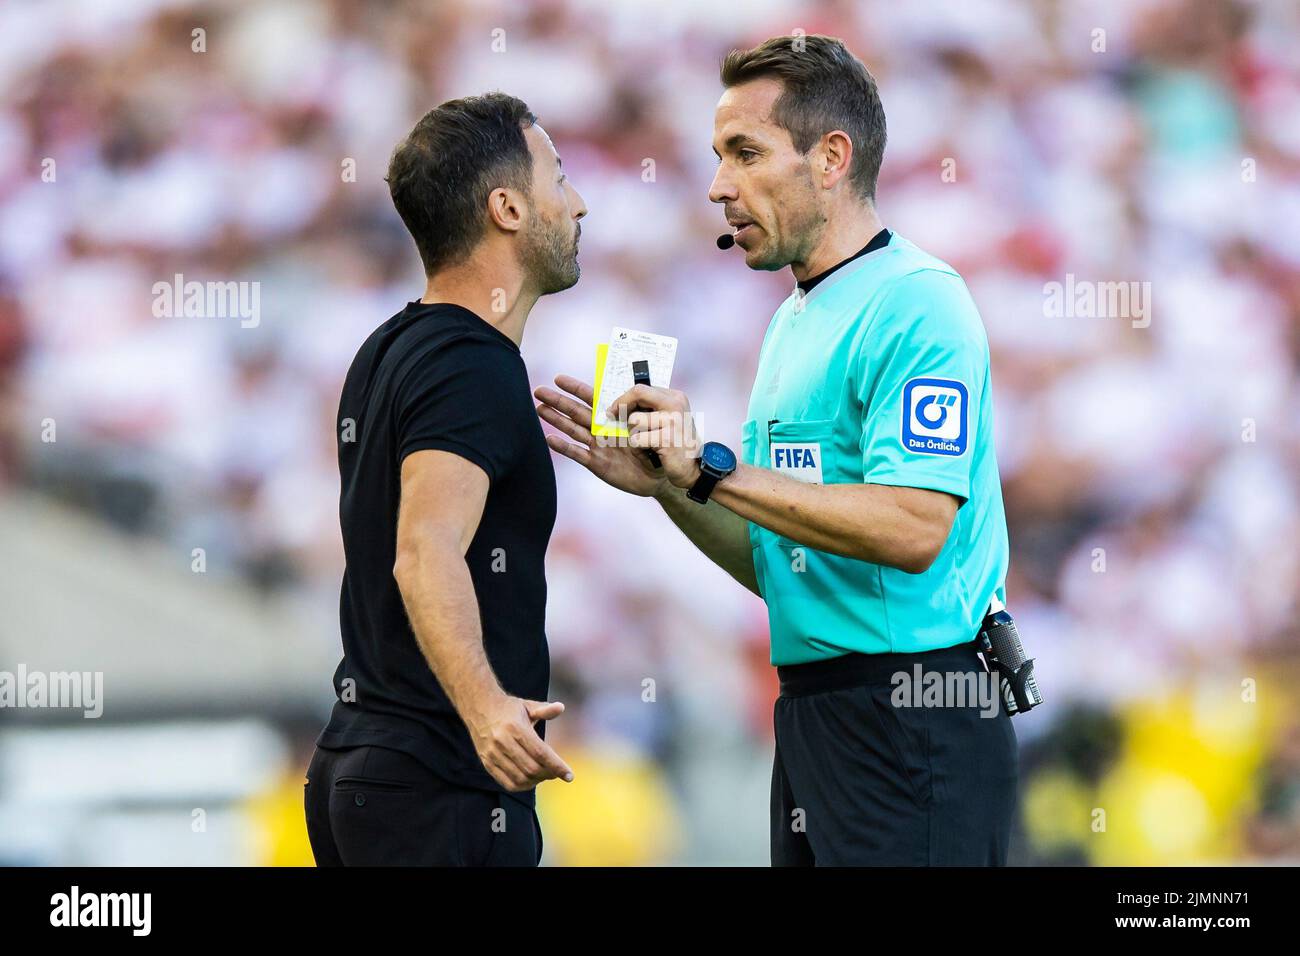 07 August 2022, Baden-Wuerttemberg, Stuttgart: Soccer: Bundesliga, VfB Stuttgart - RB Leipzig, Matchday 1, Mercedes-Benz Arena. Leipzig coach Domenico Tedesco (l) talks to referee Tobias Stieler (r). Photo: Tom Weller/dpa - IMPORTANT NOTE: In accordance with the requirements of the DFL Deutsche Fußball Liga and the DFB Deutscher Fußball-Bund, it is prohibited to use or have used photographs taken in the stadium and/or of the match in the form of sequence pictures and/or video-like photo series. Stock Photo